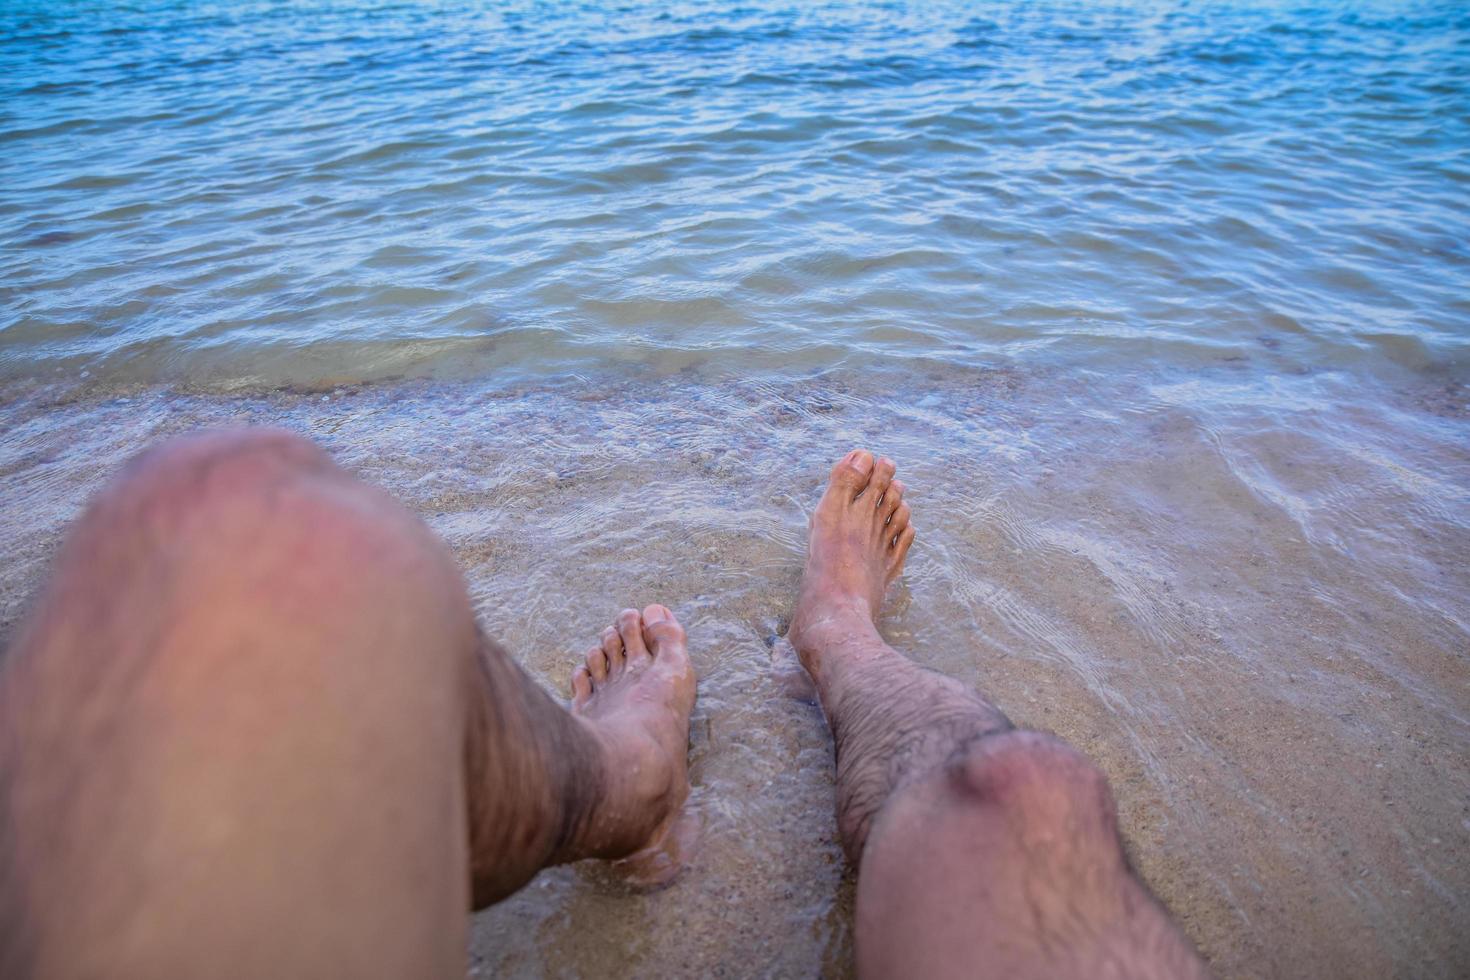 Man is on beach and feet in the sea photo